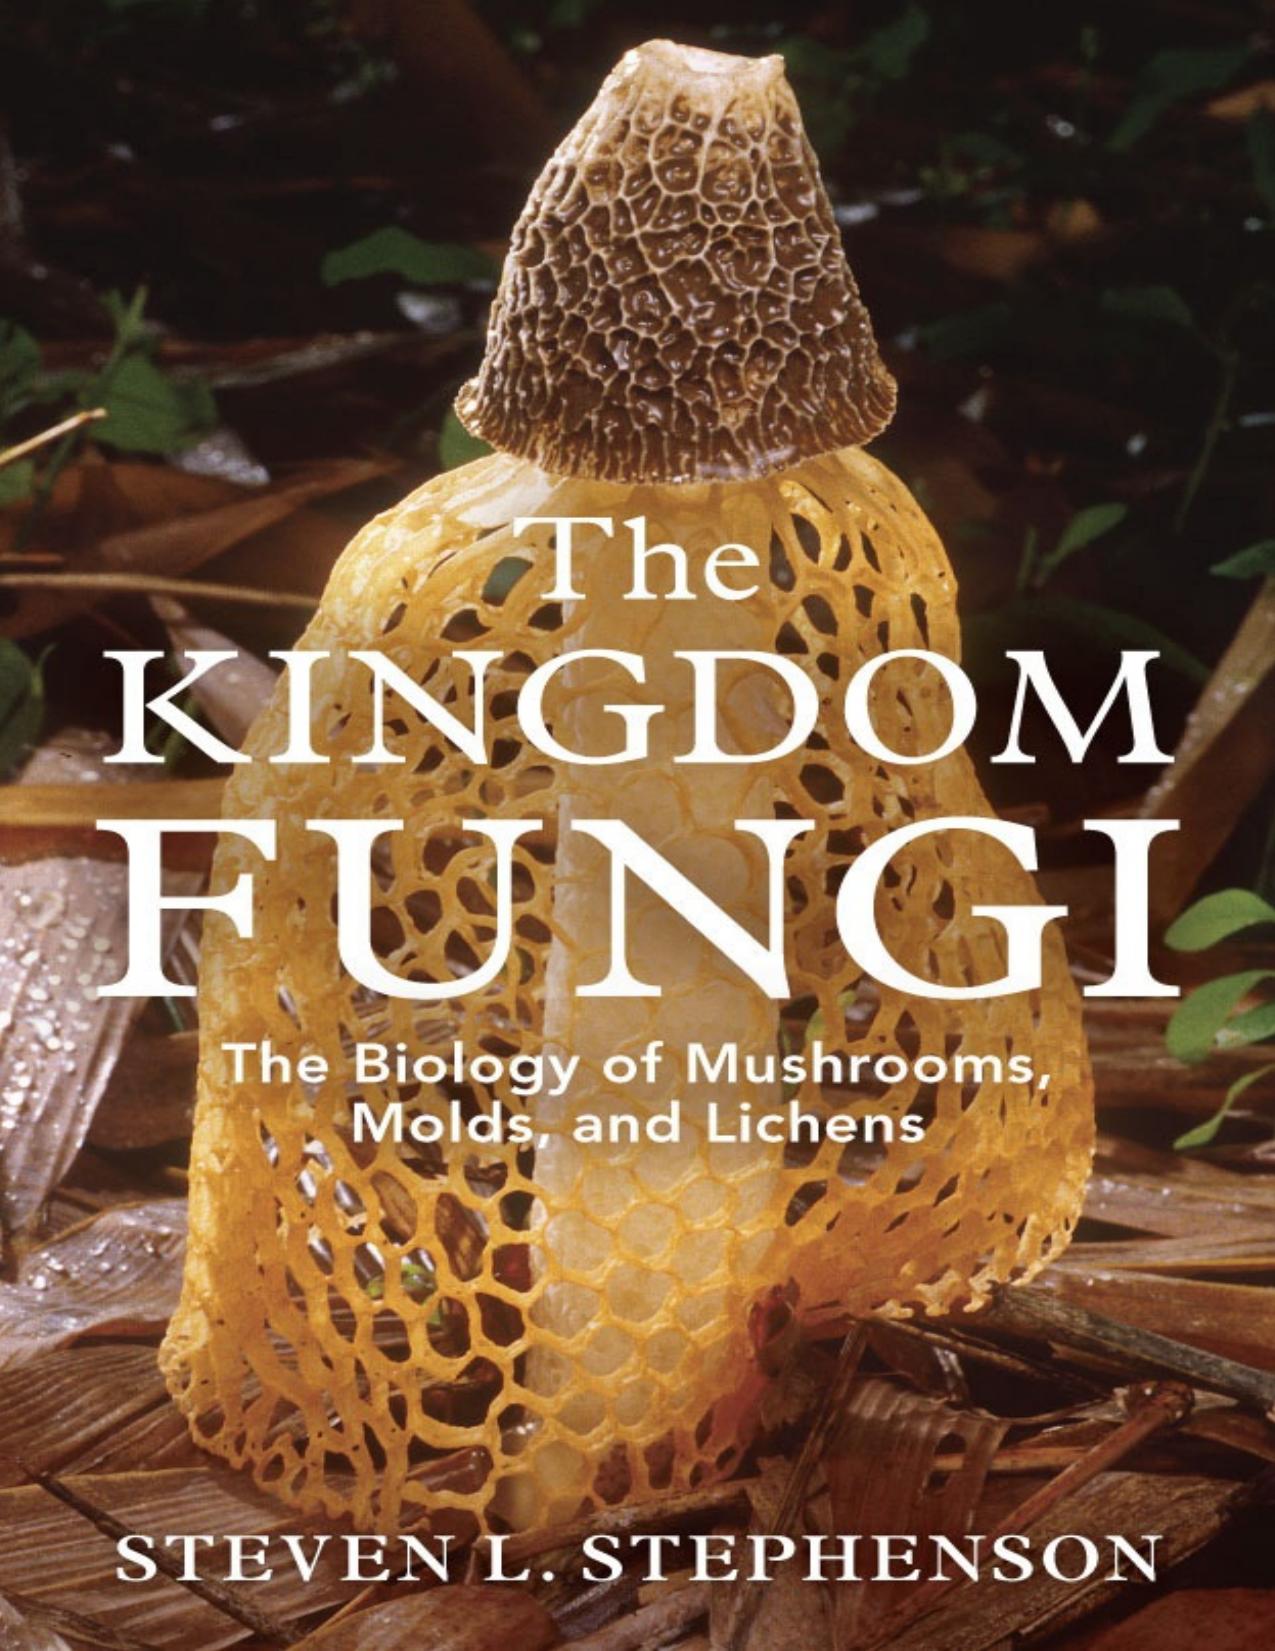 The Kingdom Fungi: The Biology of Mushrooms, Molds, and Lichens - PDFDrive.com